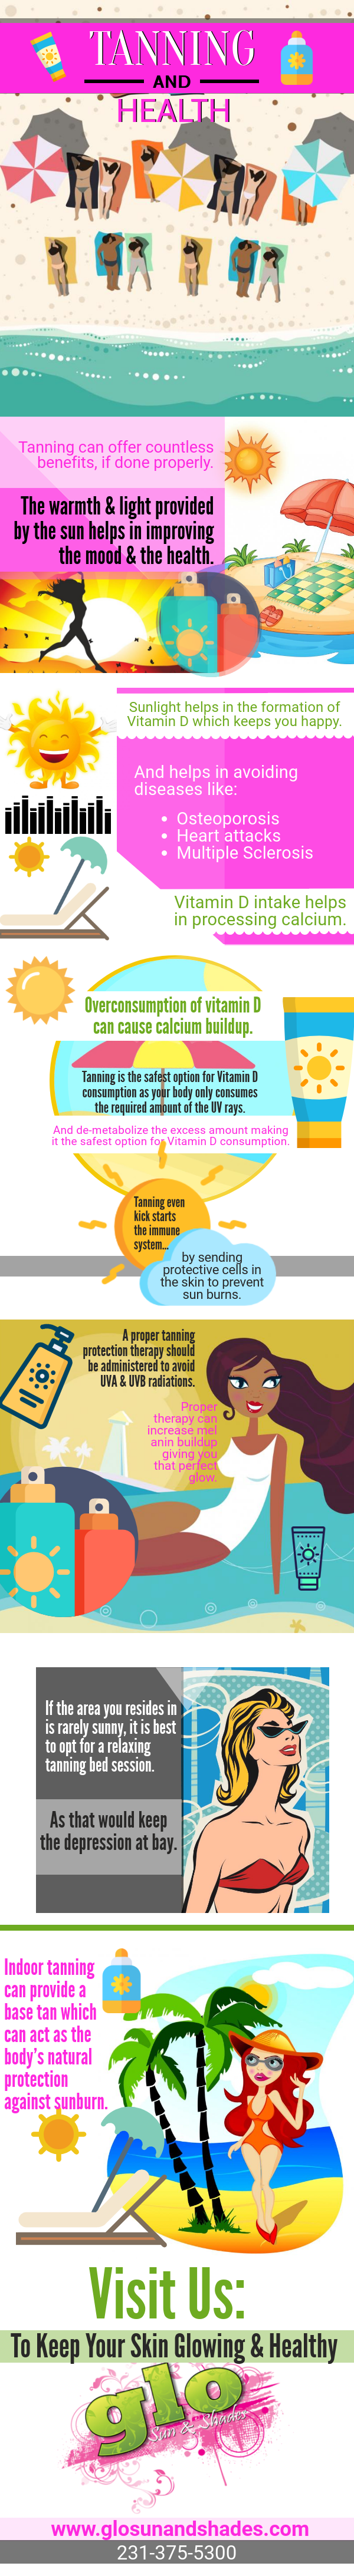 Tanning can offer countless benefits